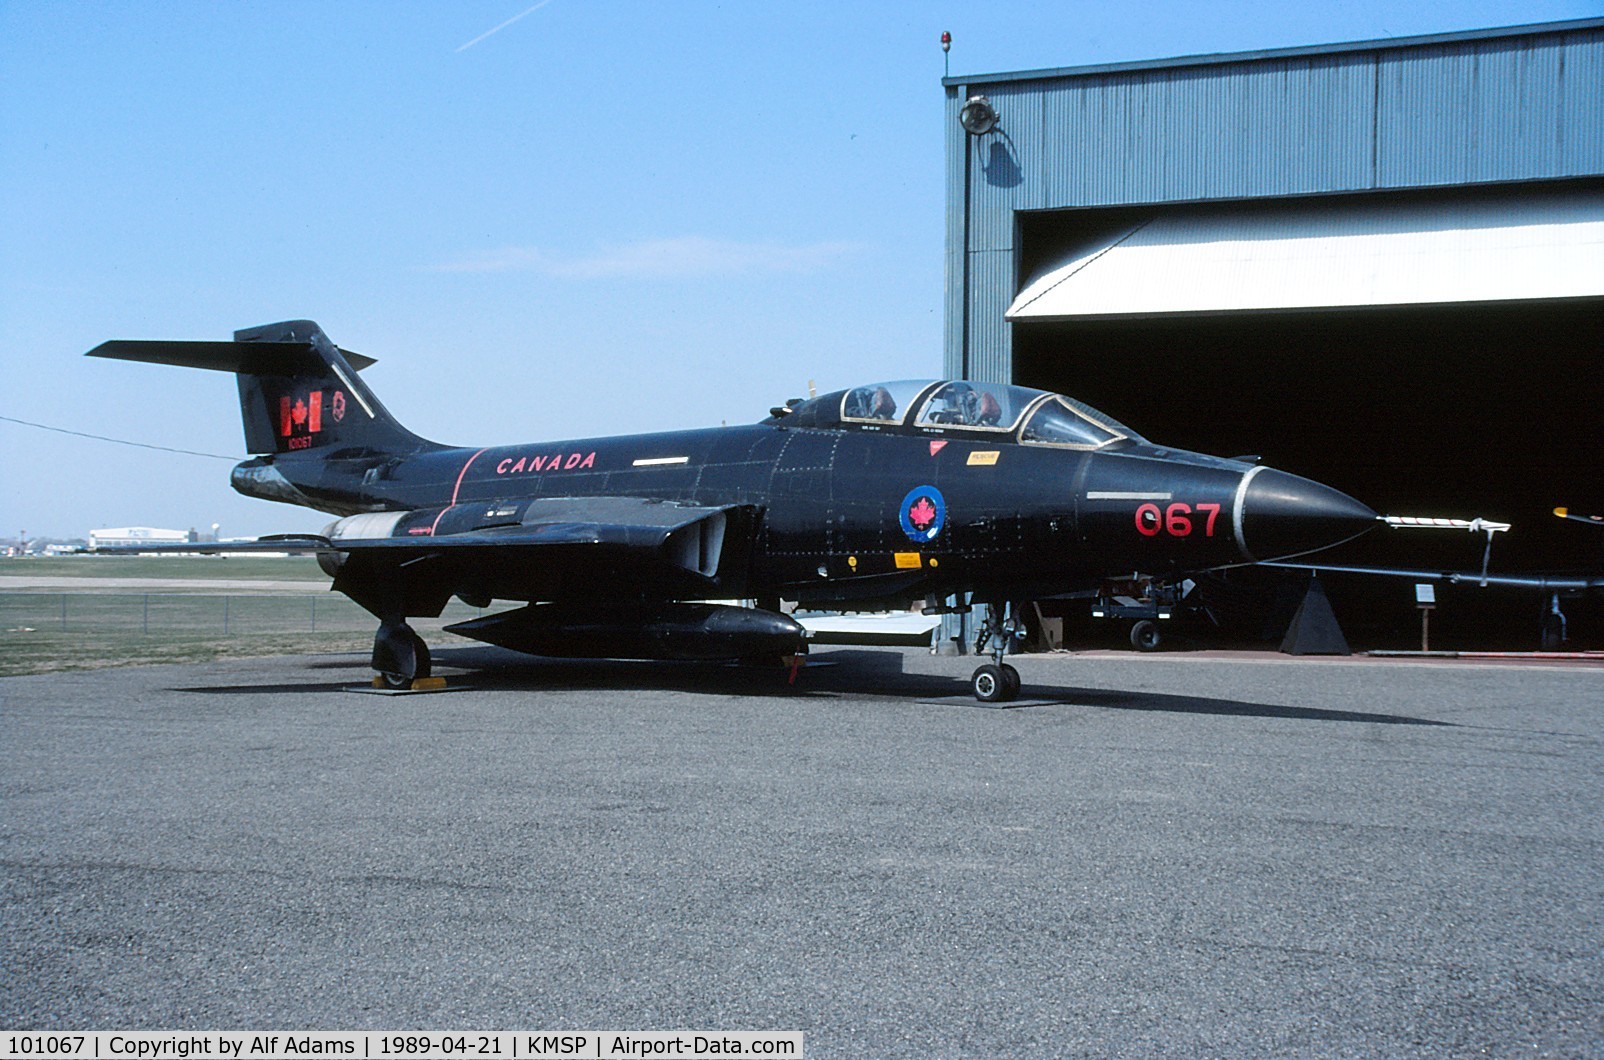 101067, 1958 McDonnell F-101B Voodoo C/N 672, Shown in RCAF colors at the Minnesota Air Guard Museum in 1989, before being repainted in USAF colors.